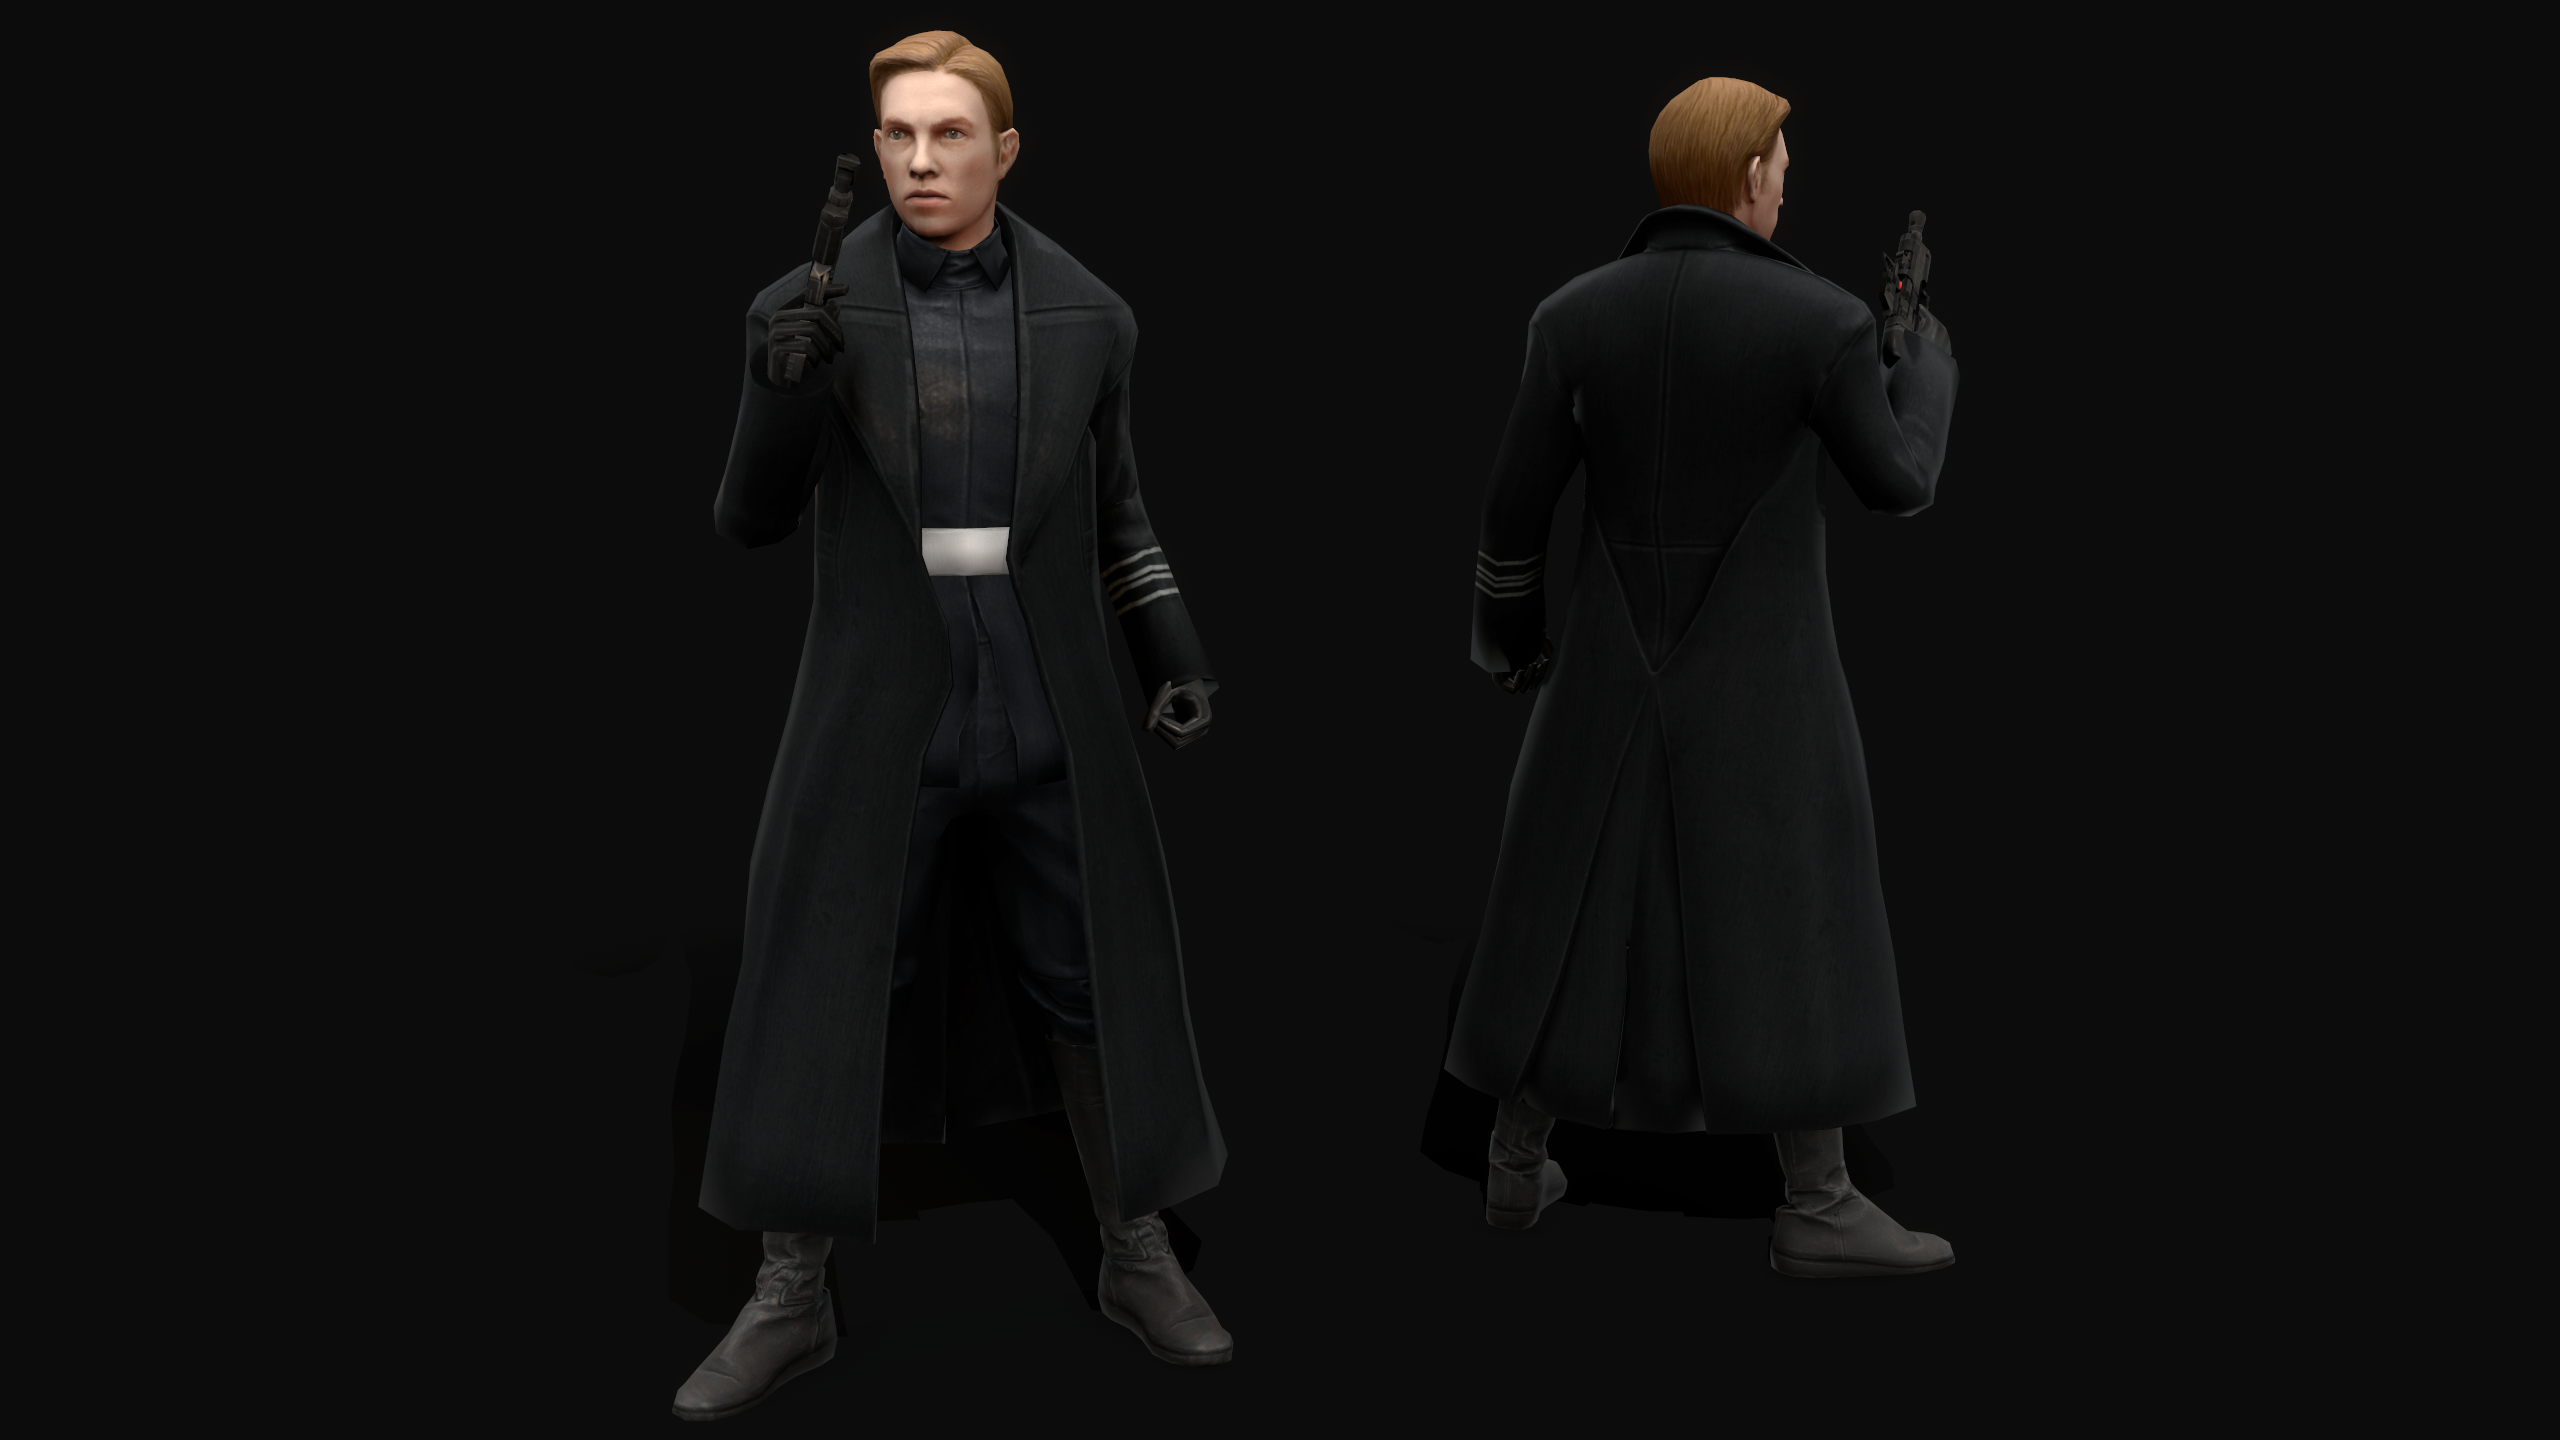 General Hux of the First Order